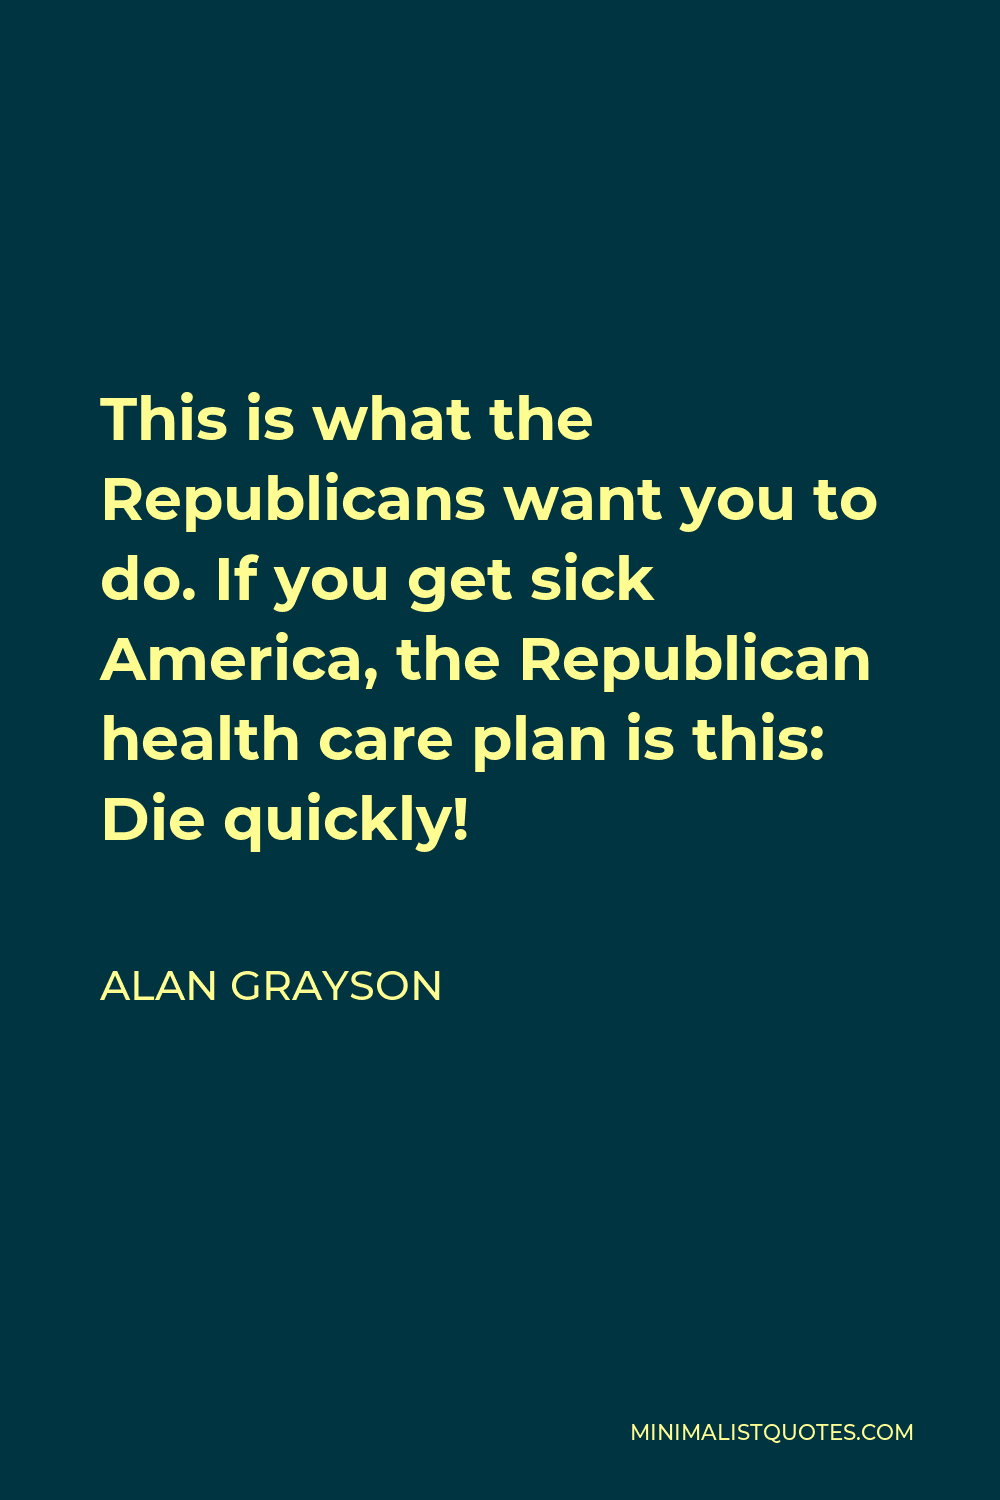 Alan Grayson Quote - This is what the Republicans want you to do. If you get sick America, the Republican health care plan is this: Die quickly!